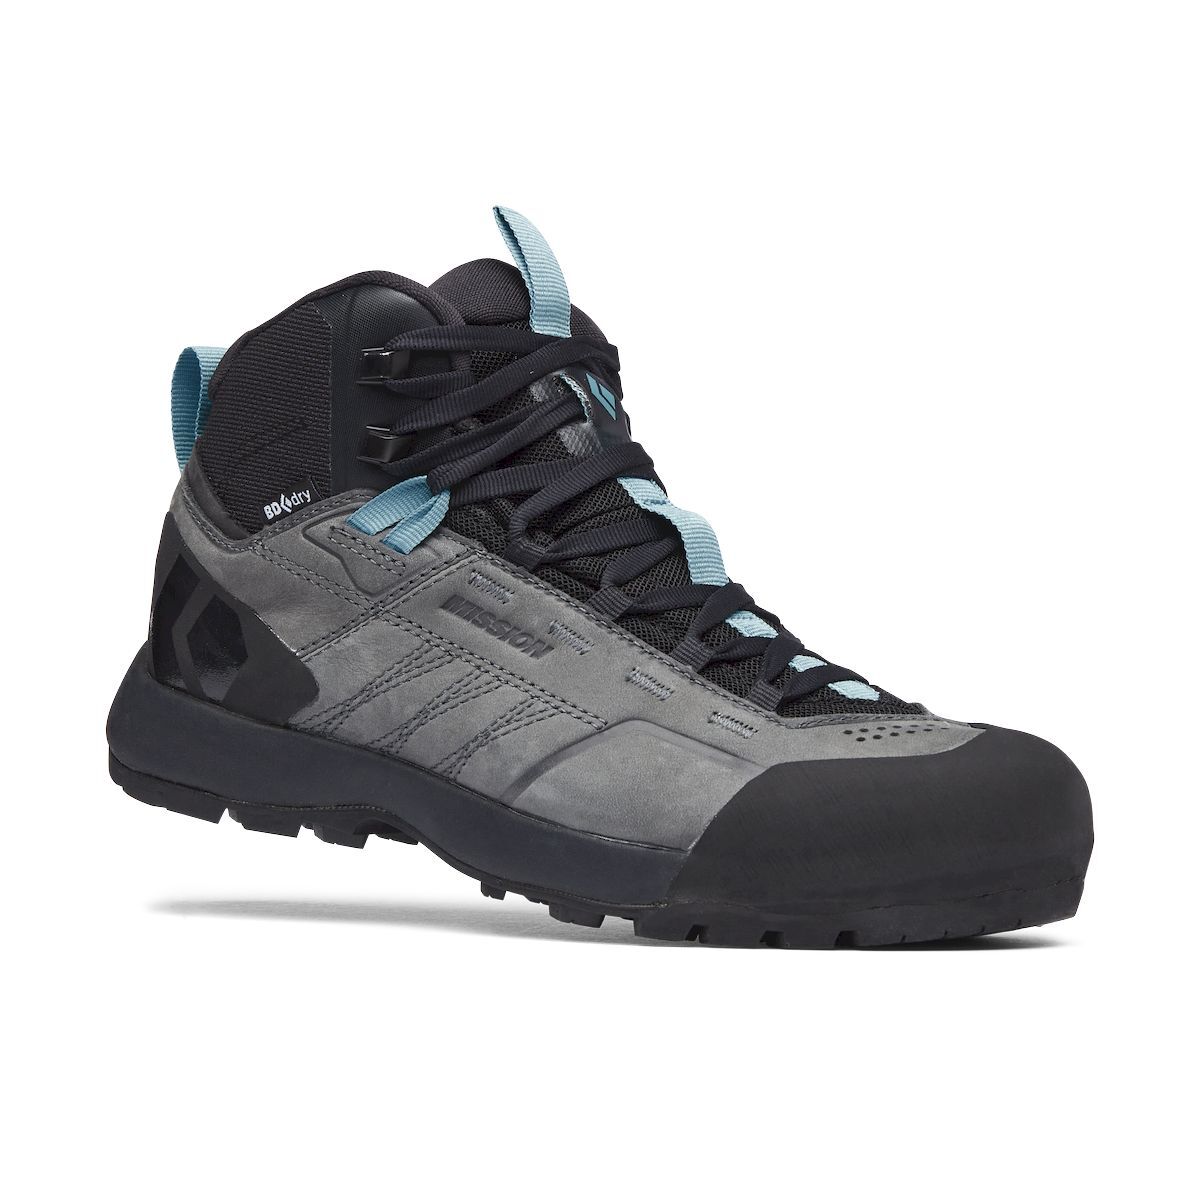 Black Diamond Mission Leather Mid Wp - Approachsko